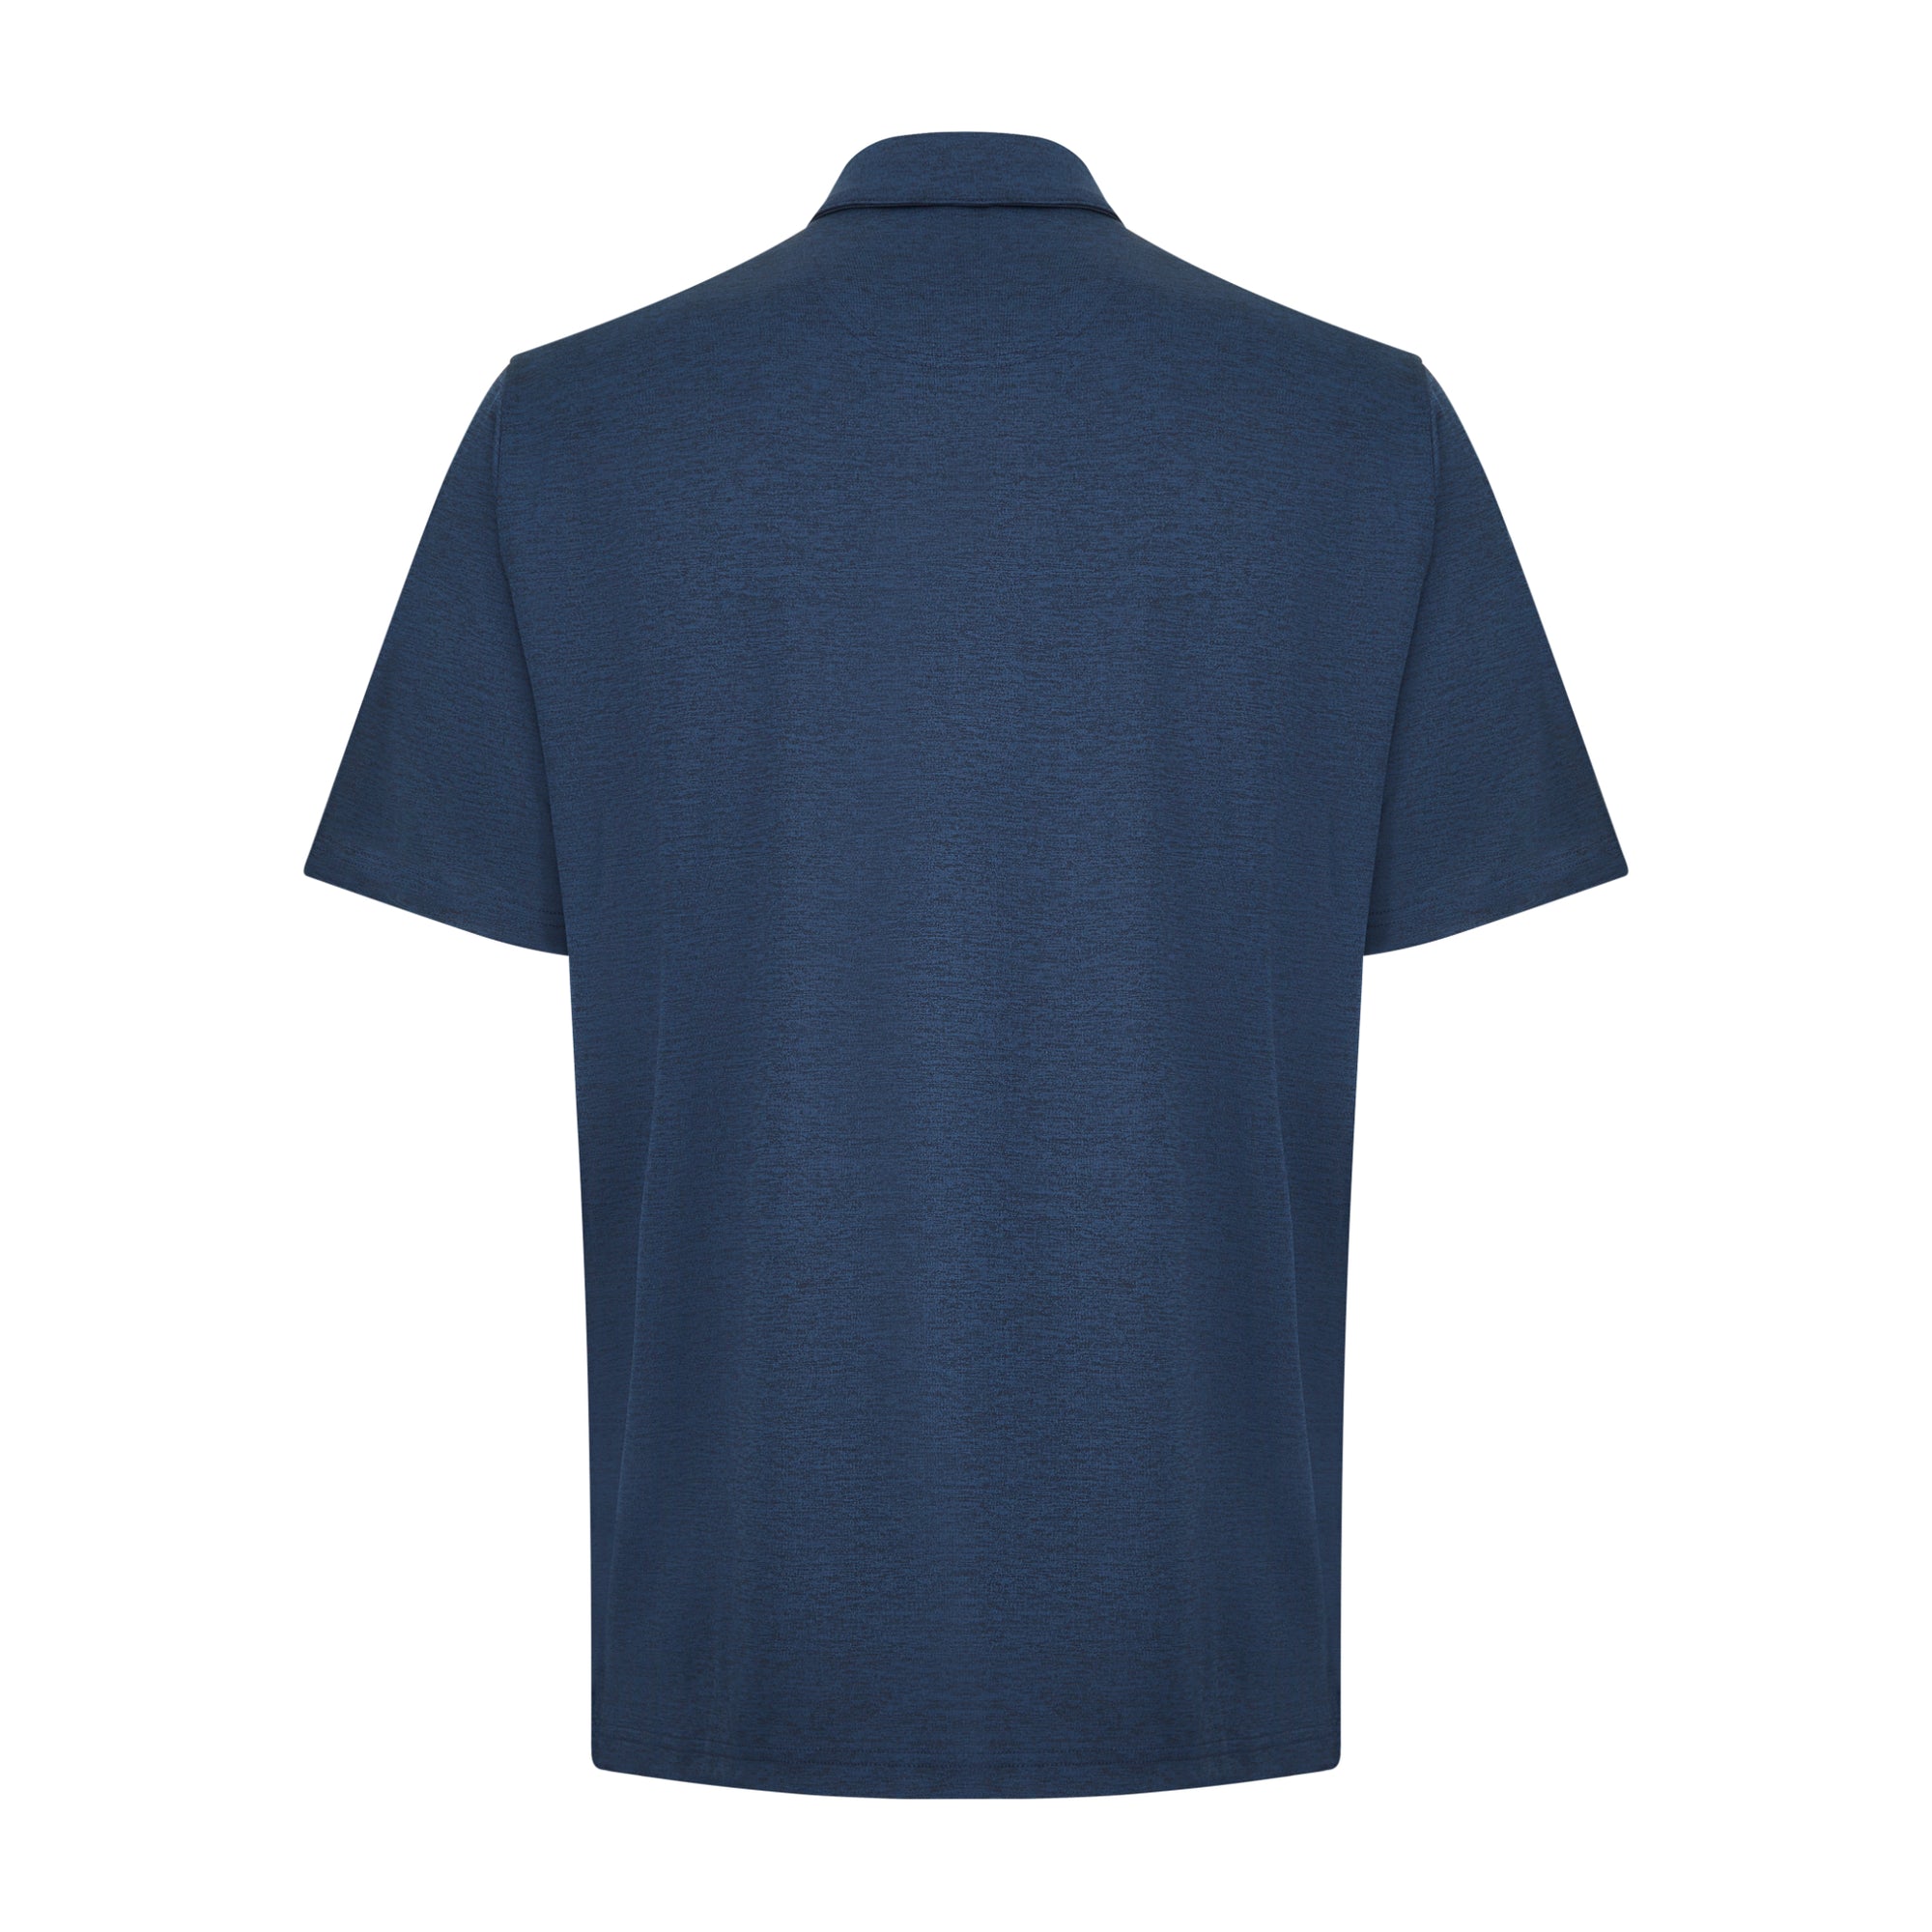 2023 Ryder Cup Men's Navy Marl Polo - Front